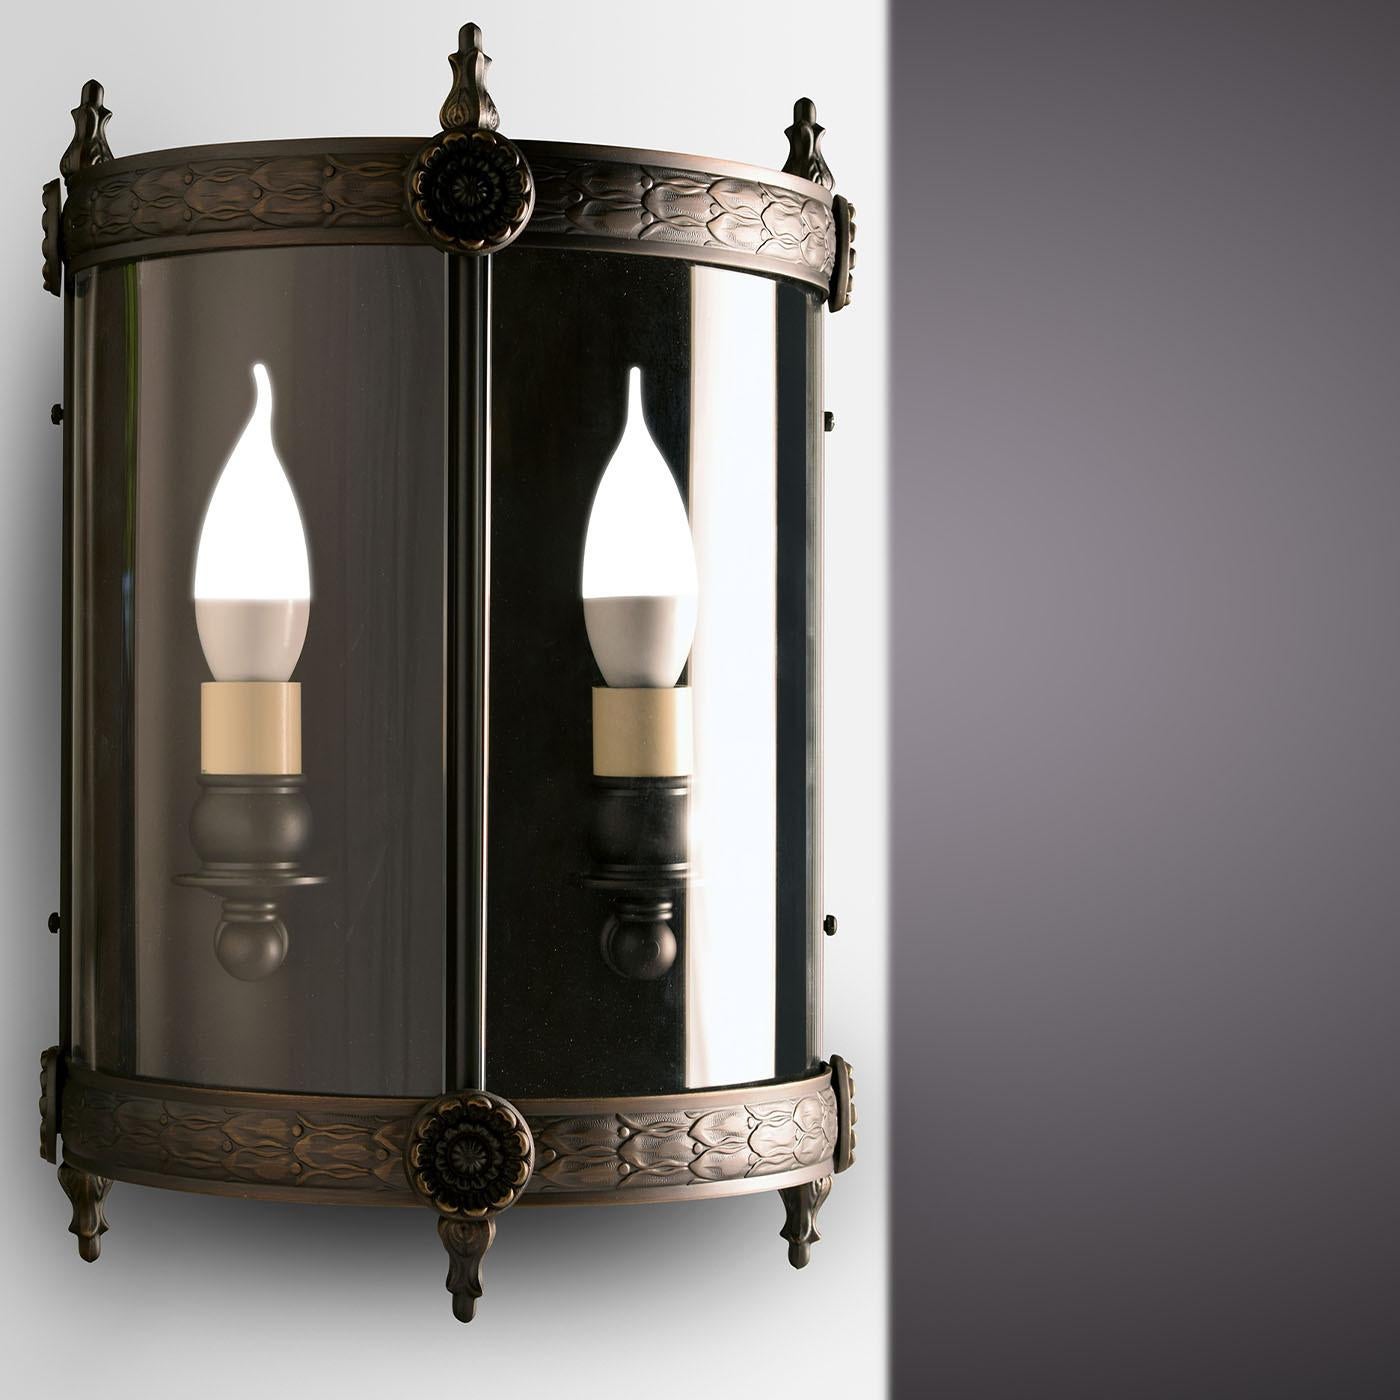 Part of the Lucerna Collection of brass lanterns distinguished by an unmistakable classic style and refined antiqued bronze-veil finish, this wall lamp makes for a superb addition to sophisticated traditional interiors. Minute chiseled detailing